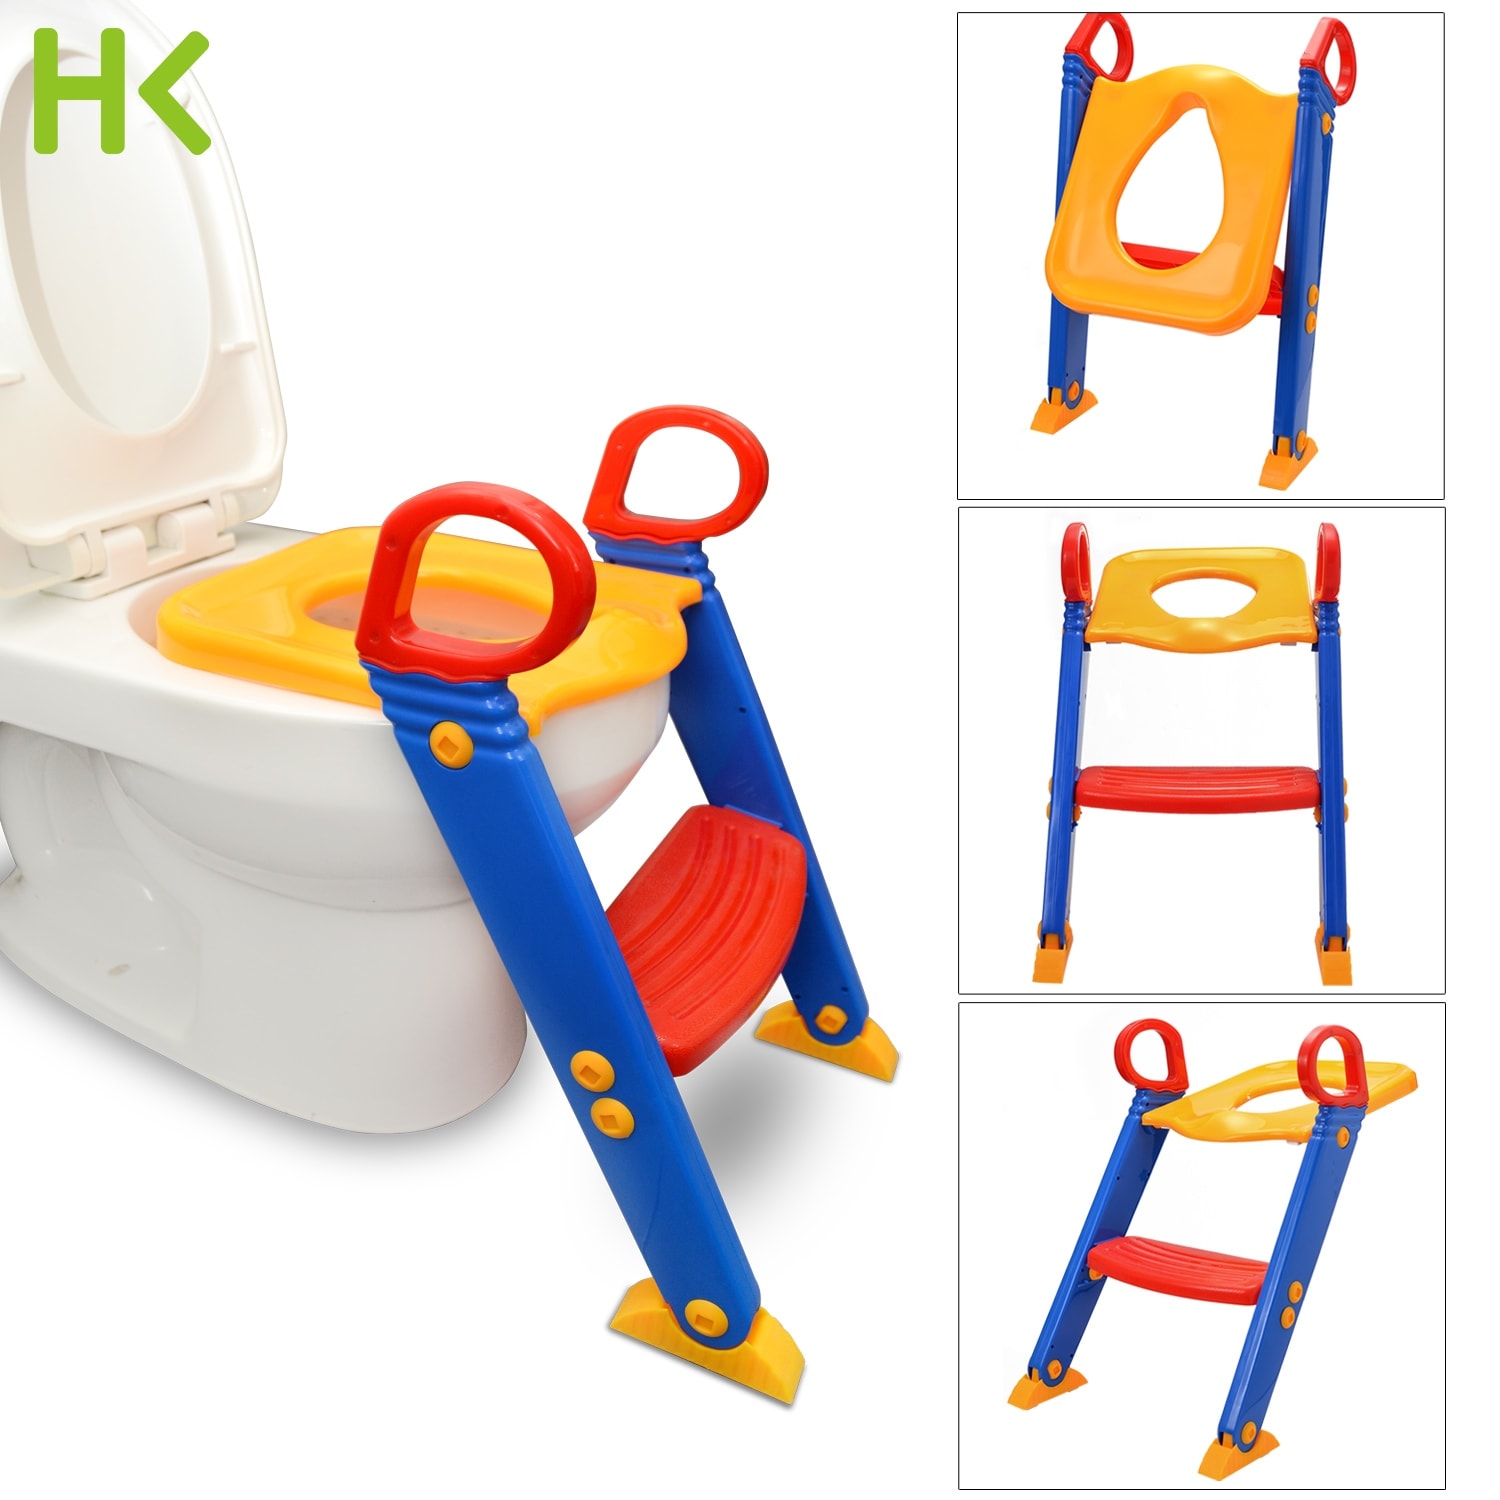 Red+Yellow Potty Training Seat,Adjustable Potty Training Toilet Seat with Step Stool Ladder,Handles and Non-Slip Wide Step for Baby Toddler